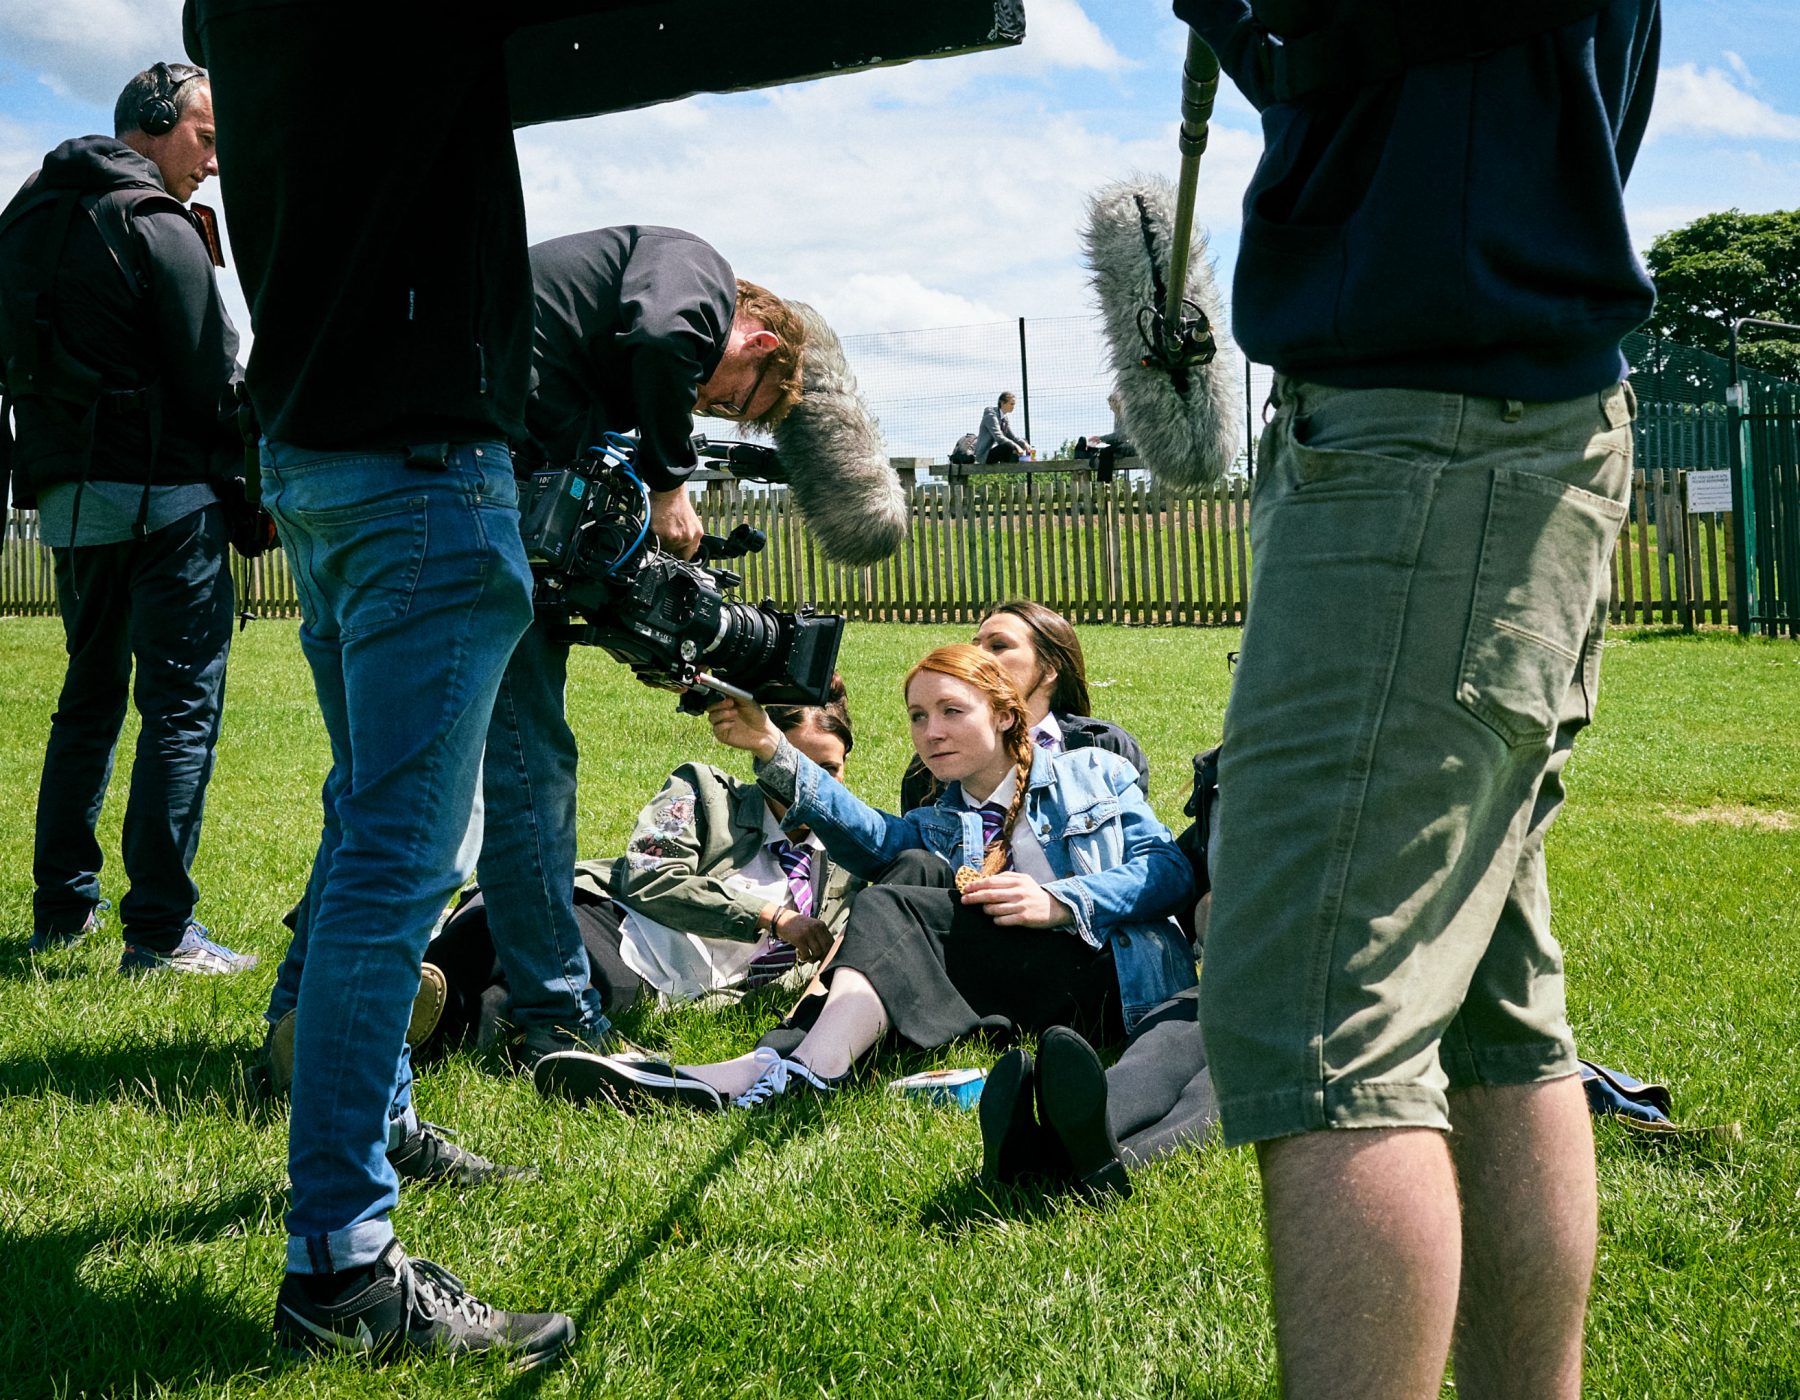 OVERSHADOWED: Rollem Productions for BBC Three